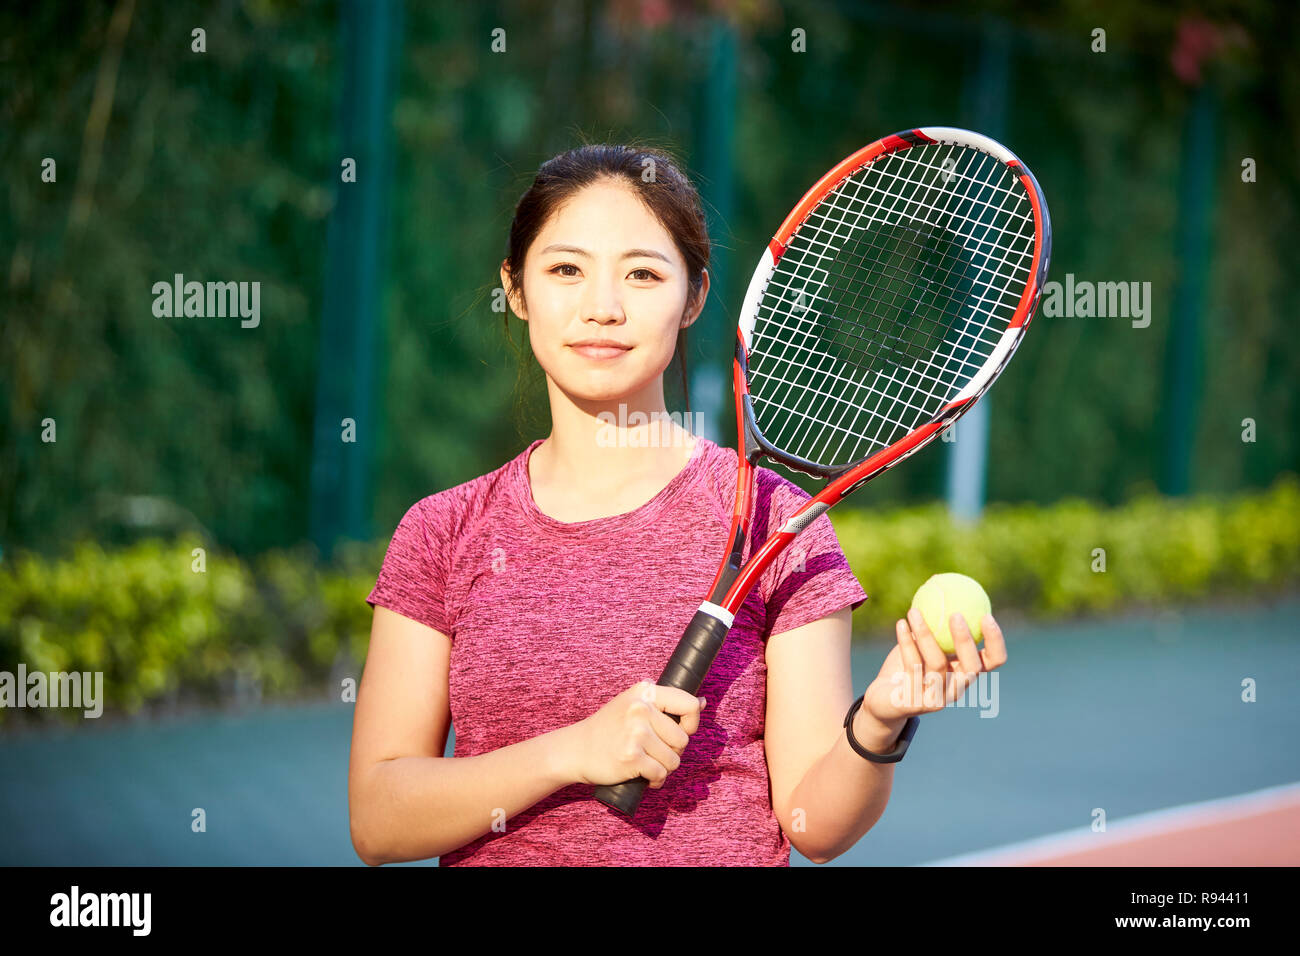 outdoor portrait of a young asian tennis player looking at camera smiling Stock Photo